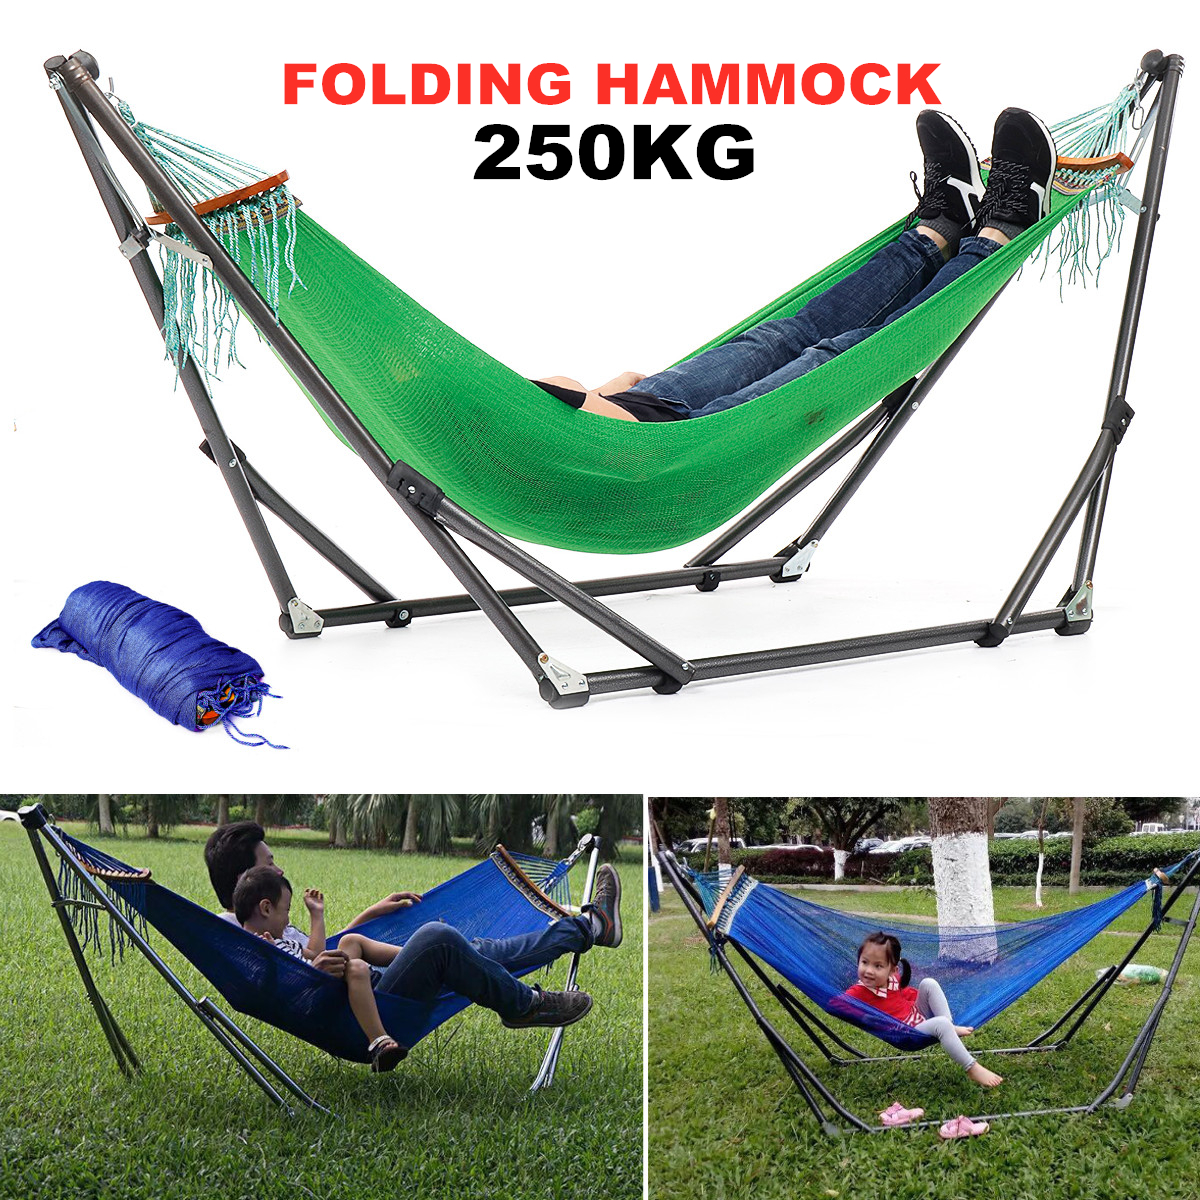 Portable Canvas Hammock Stand Portable Multifunctional Practical Outdoor Garden Swing Hammock Single Hanging Chair Bed Leisure Camping Travel 12